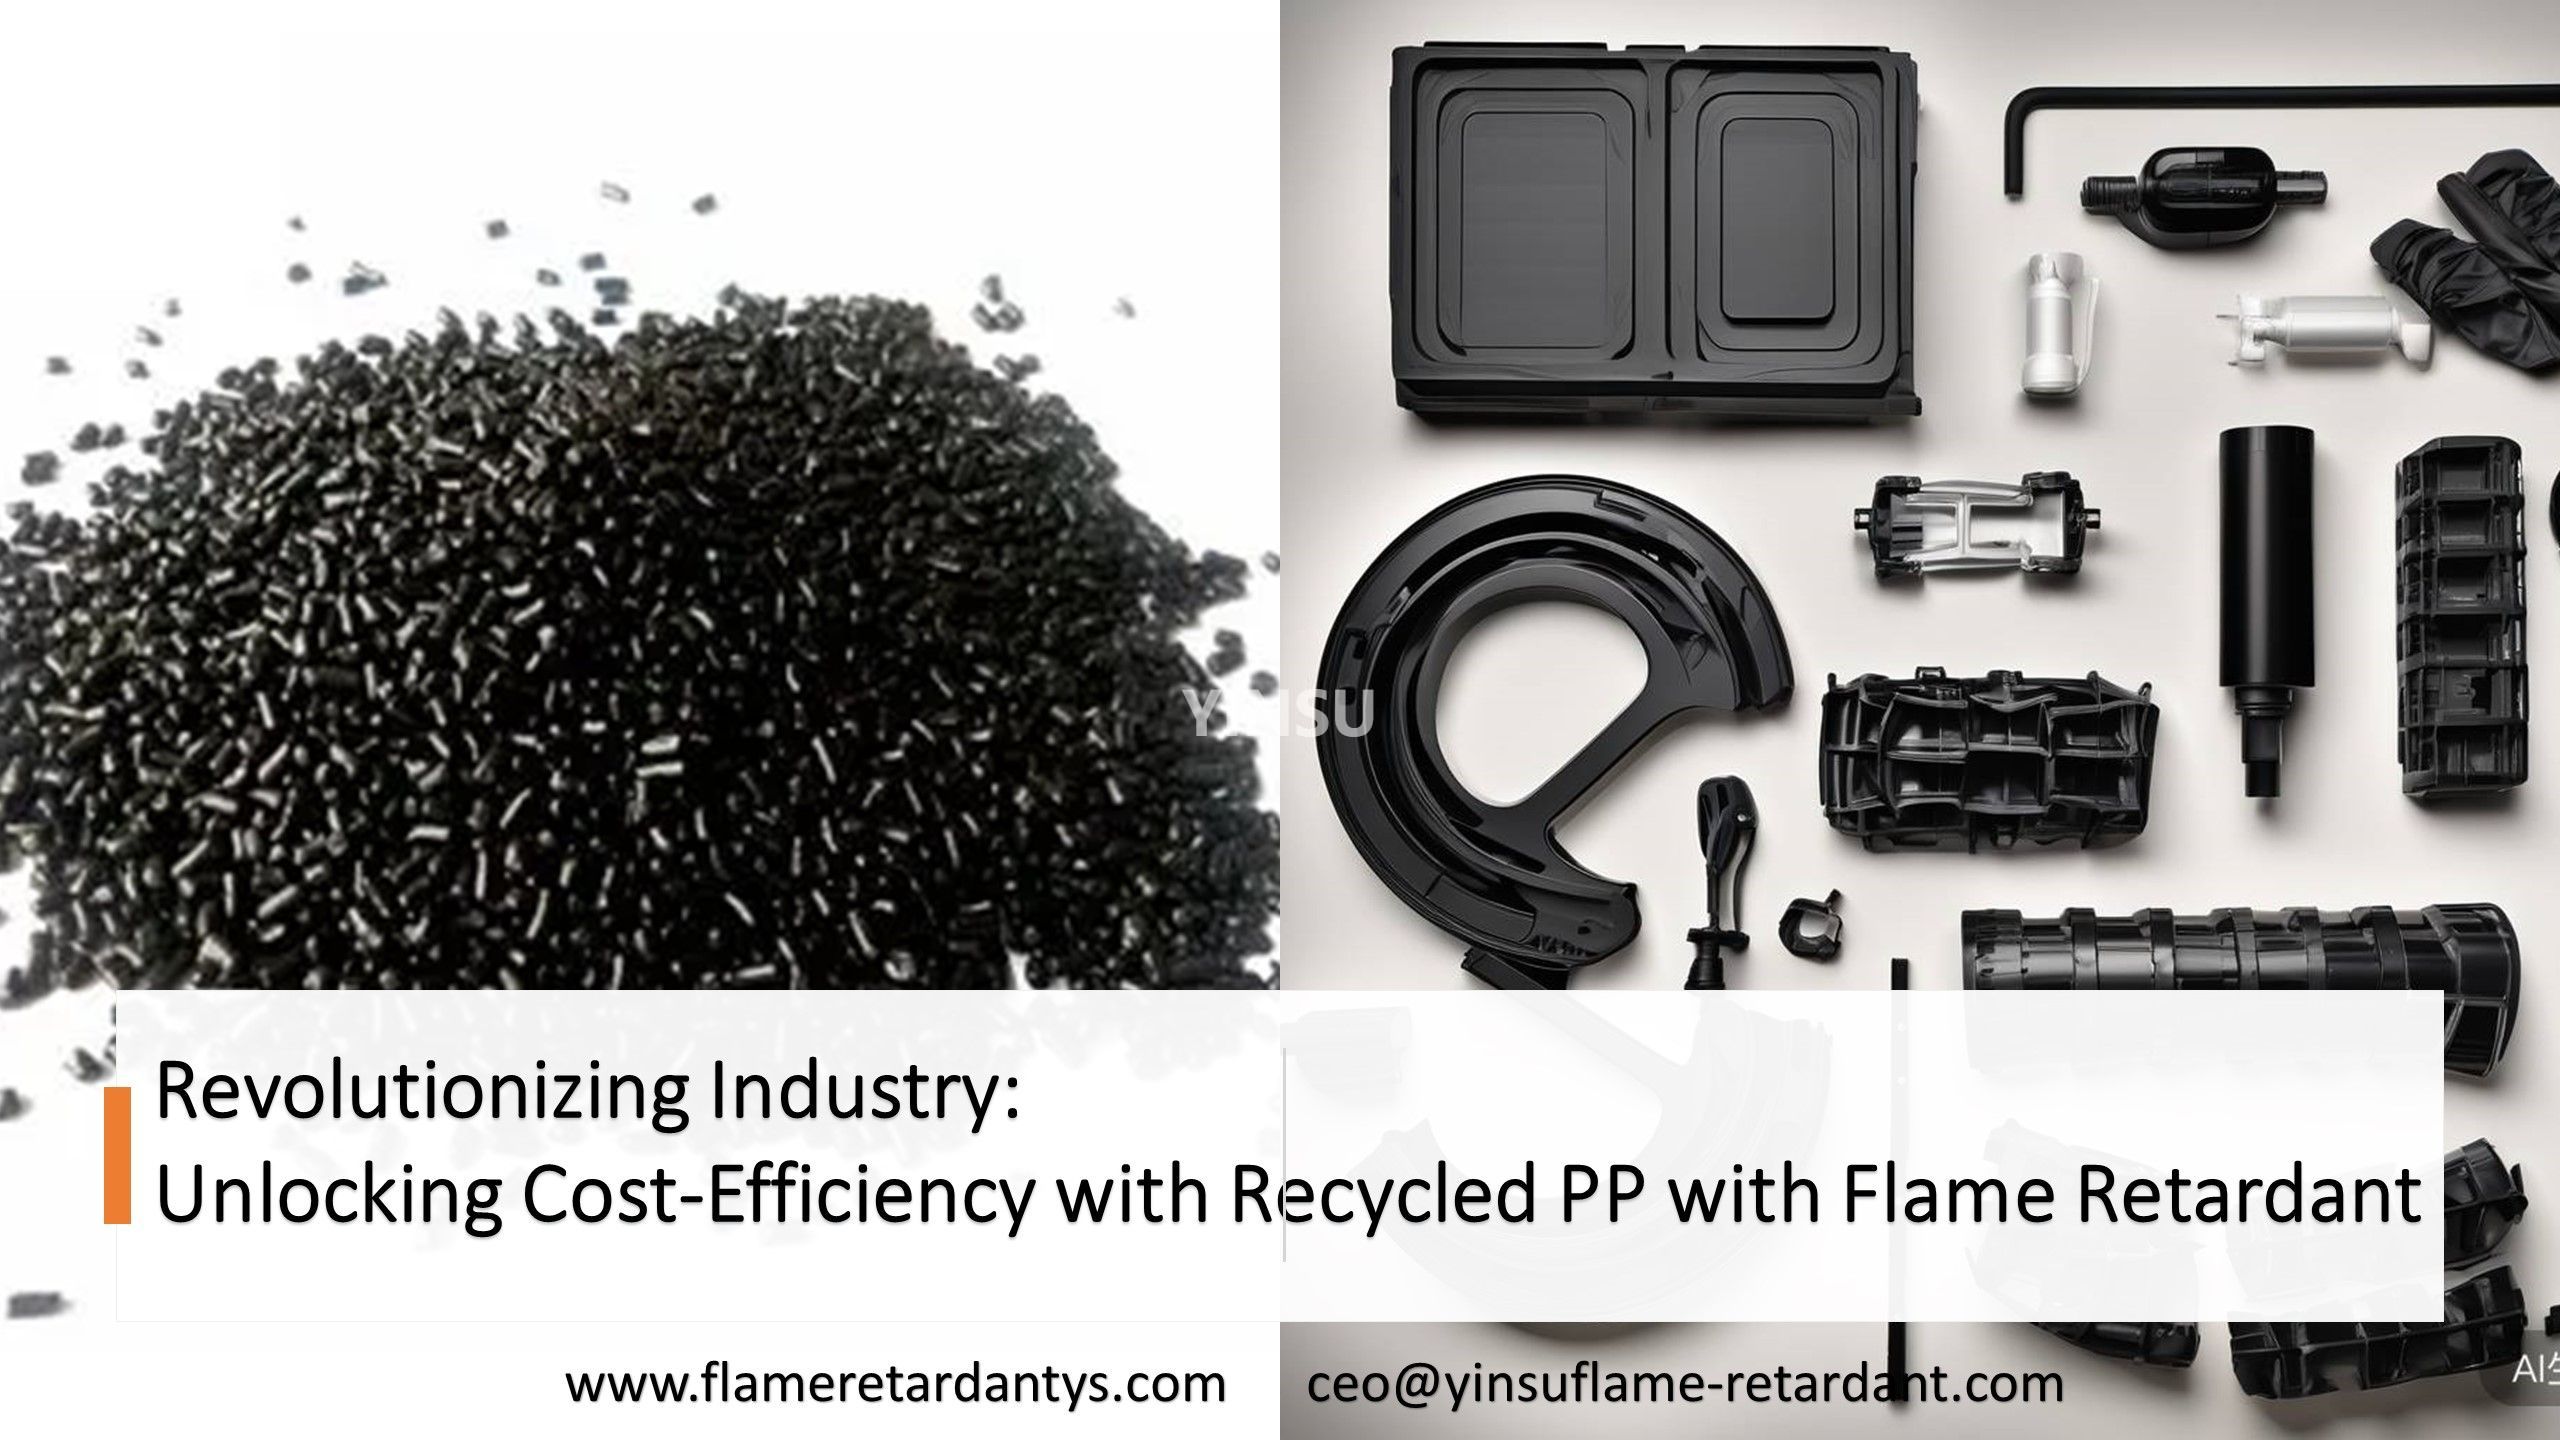 Revolutionizing Industry Unlocking Cost-Efficiency with Recycled PP and Flame Retardant